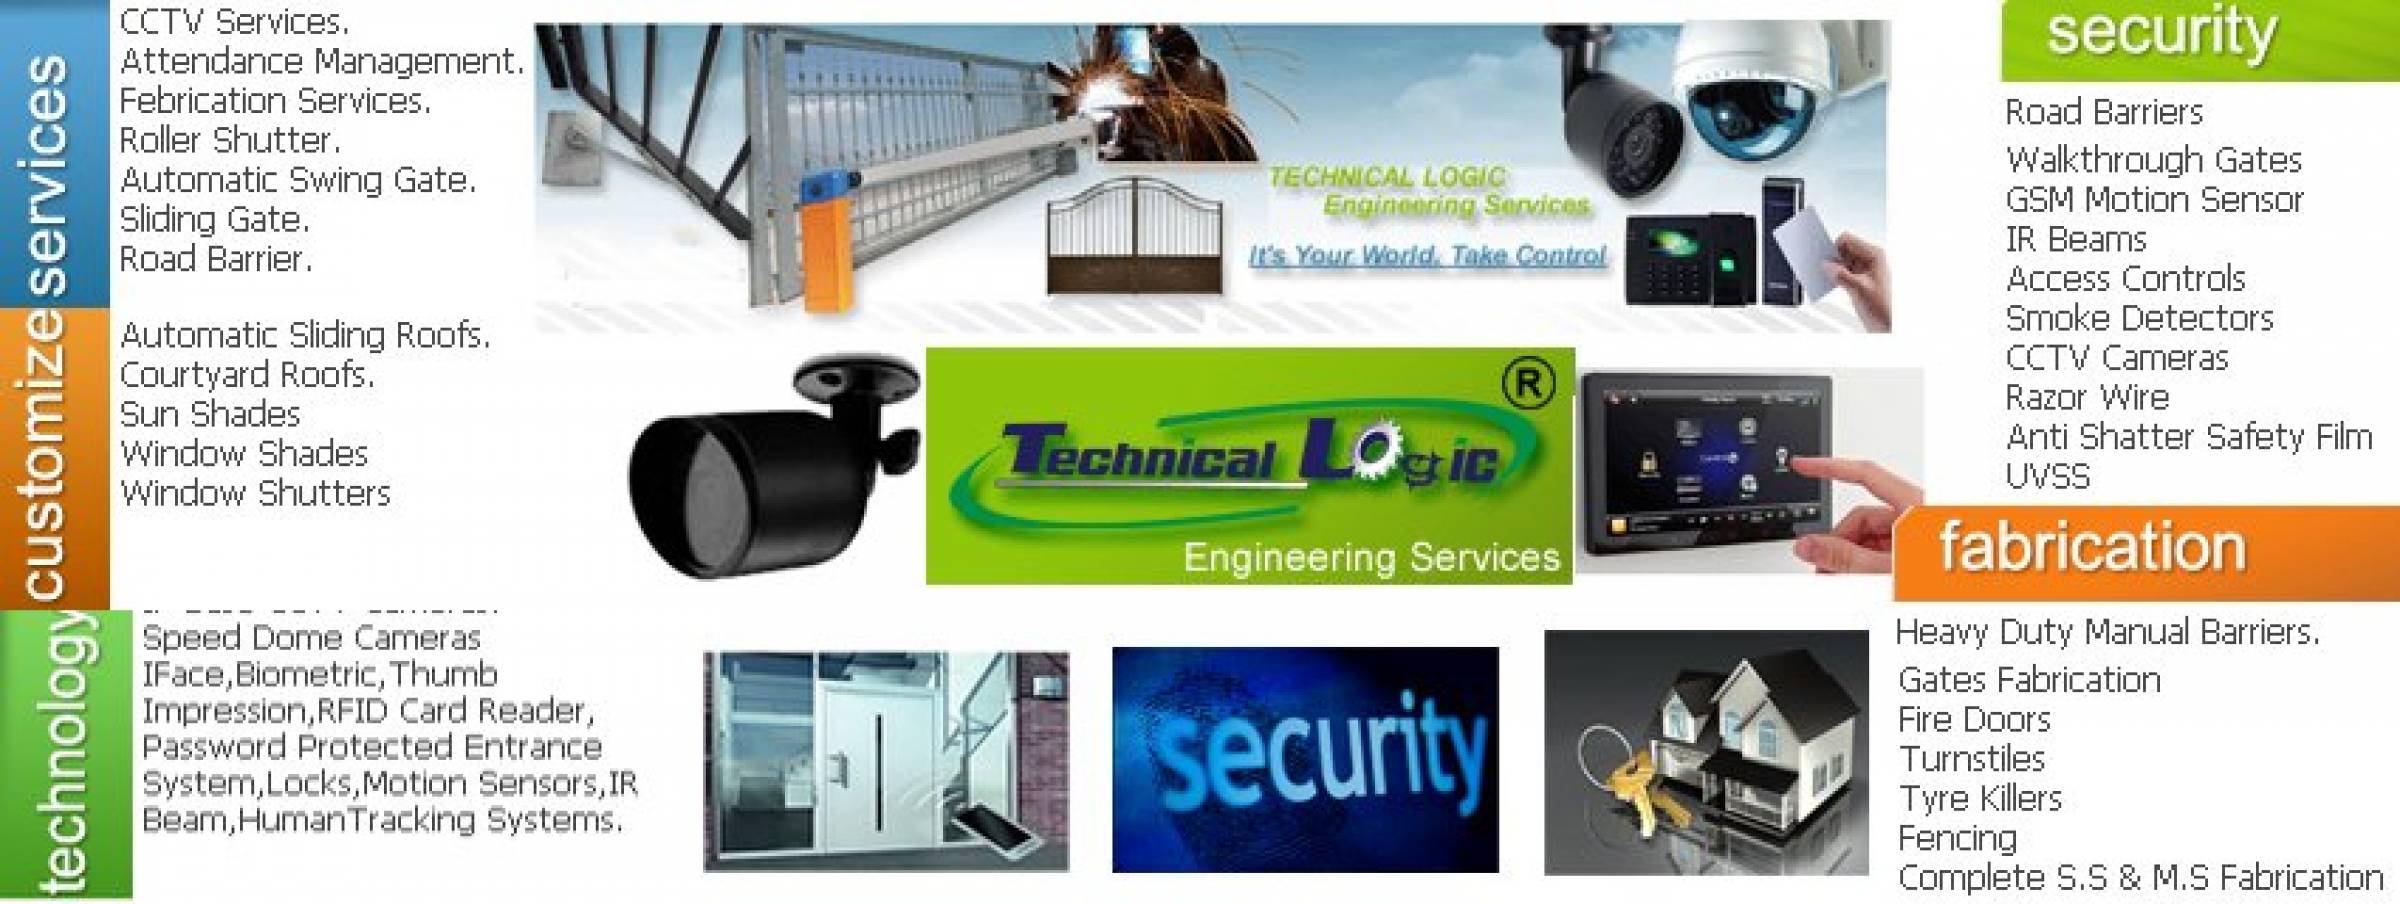 Technical Logic Engineering Services